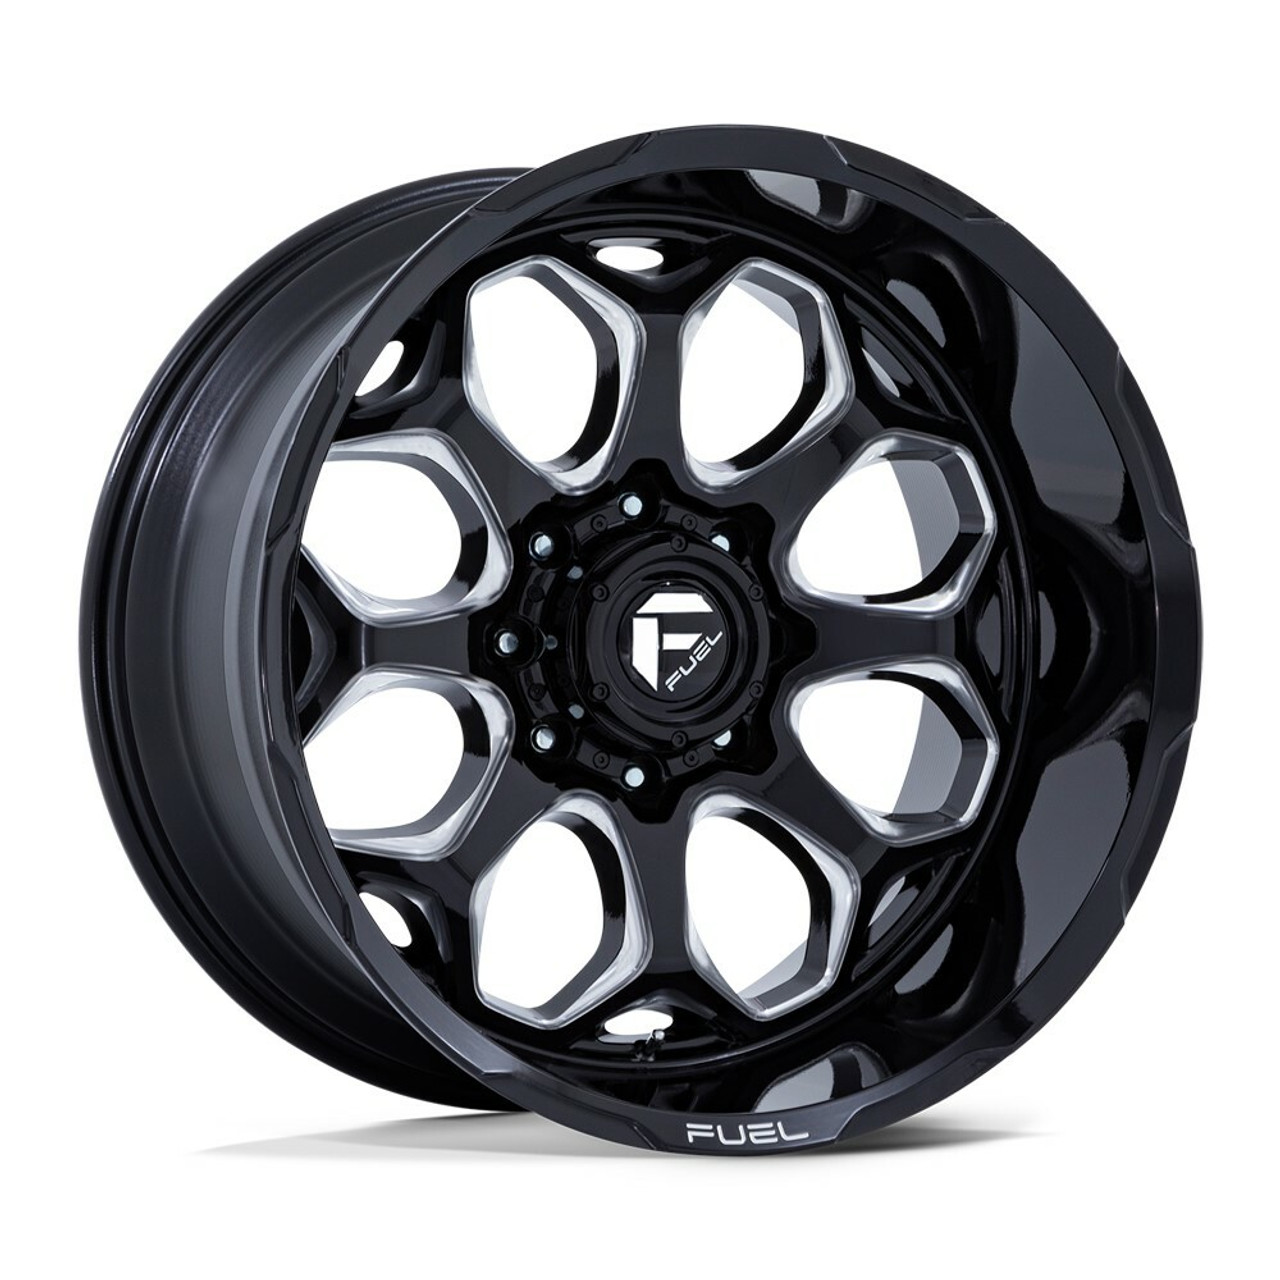 Fuel FC862 Scepter 20x10 6x135 Gloss Black Milled Wheel 20" -18mm Lifted Rims